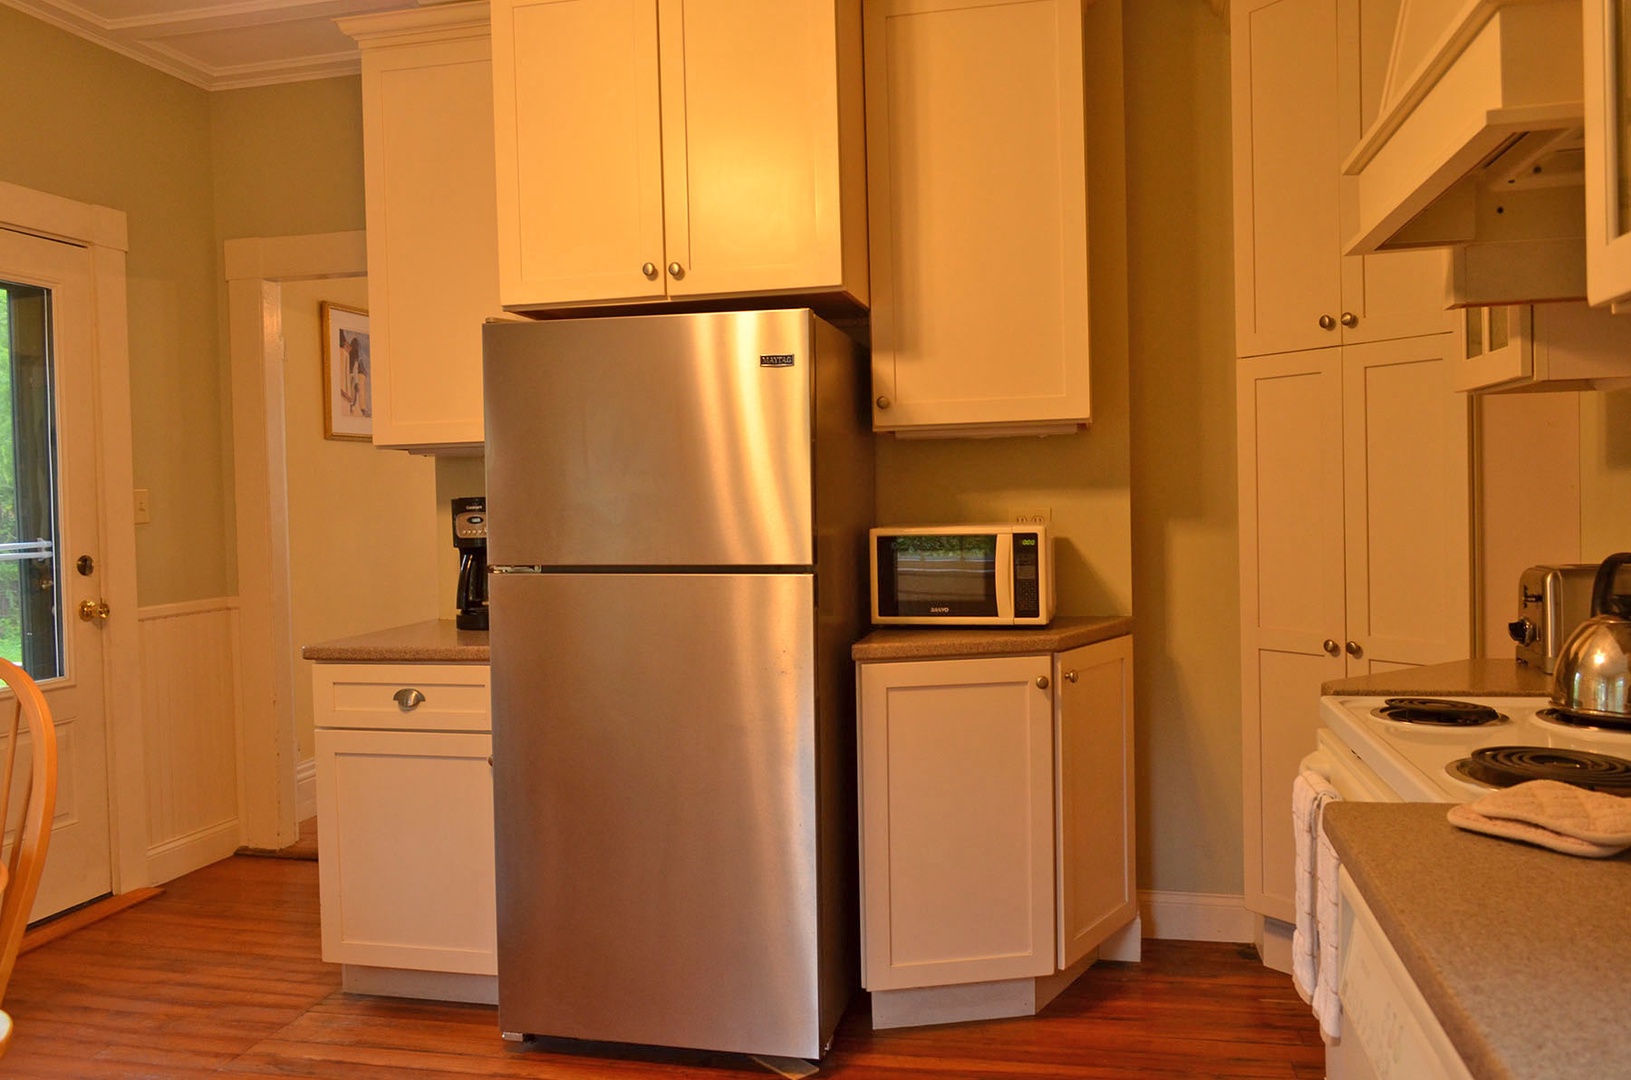 Kitchen has stainless steel refrigerator, microwave, and coffee pot.